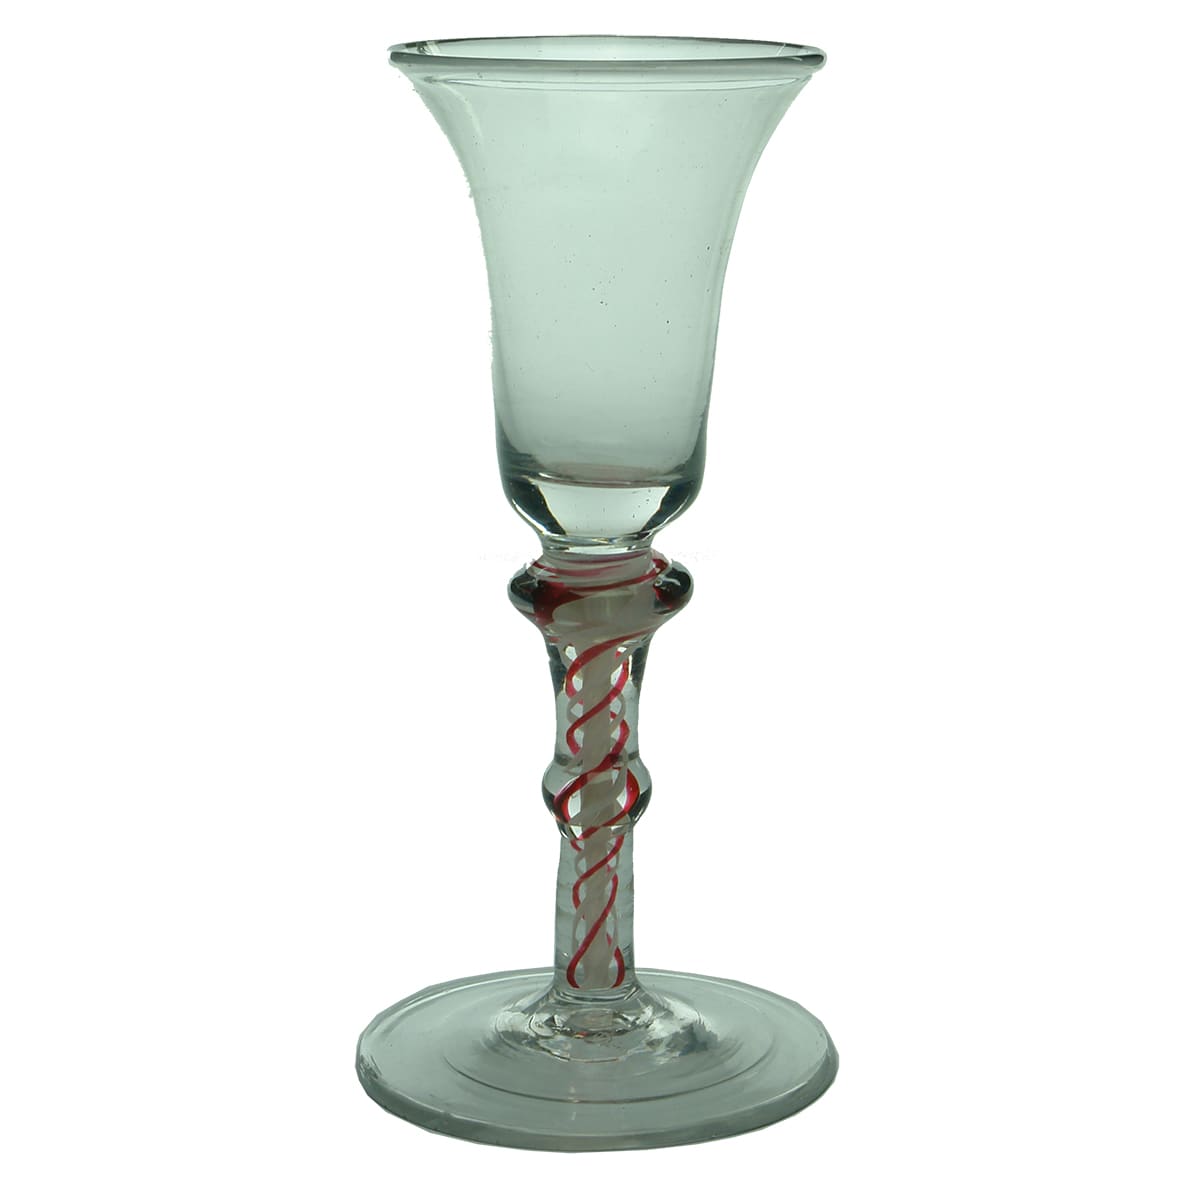 Glass. Georgian twisted white and red stem with double knop.